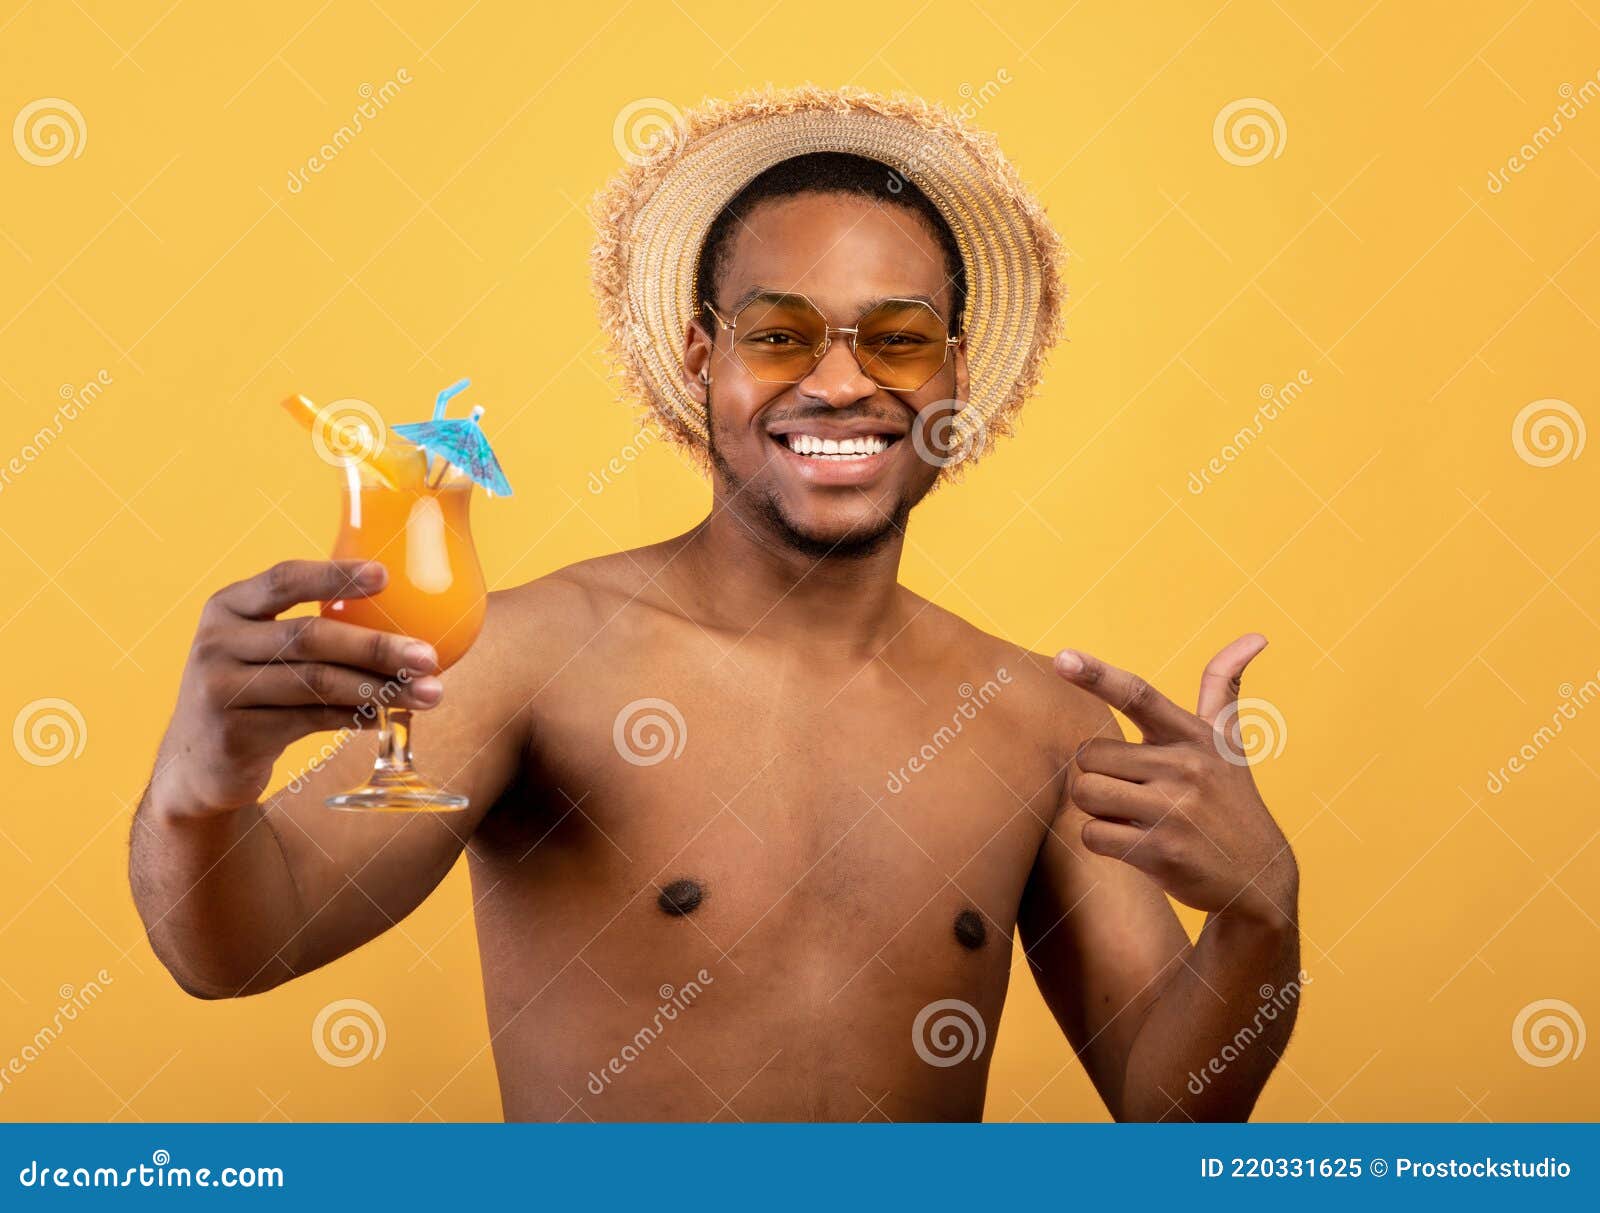 https://thumbs.dreamstime.com/z/handsome-black-man-bare-chest-pointing-tasty-summer-cocktail-having-fun-beach-party-yellow-background-handsome-black-220331625.jpg